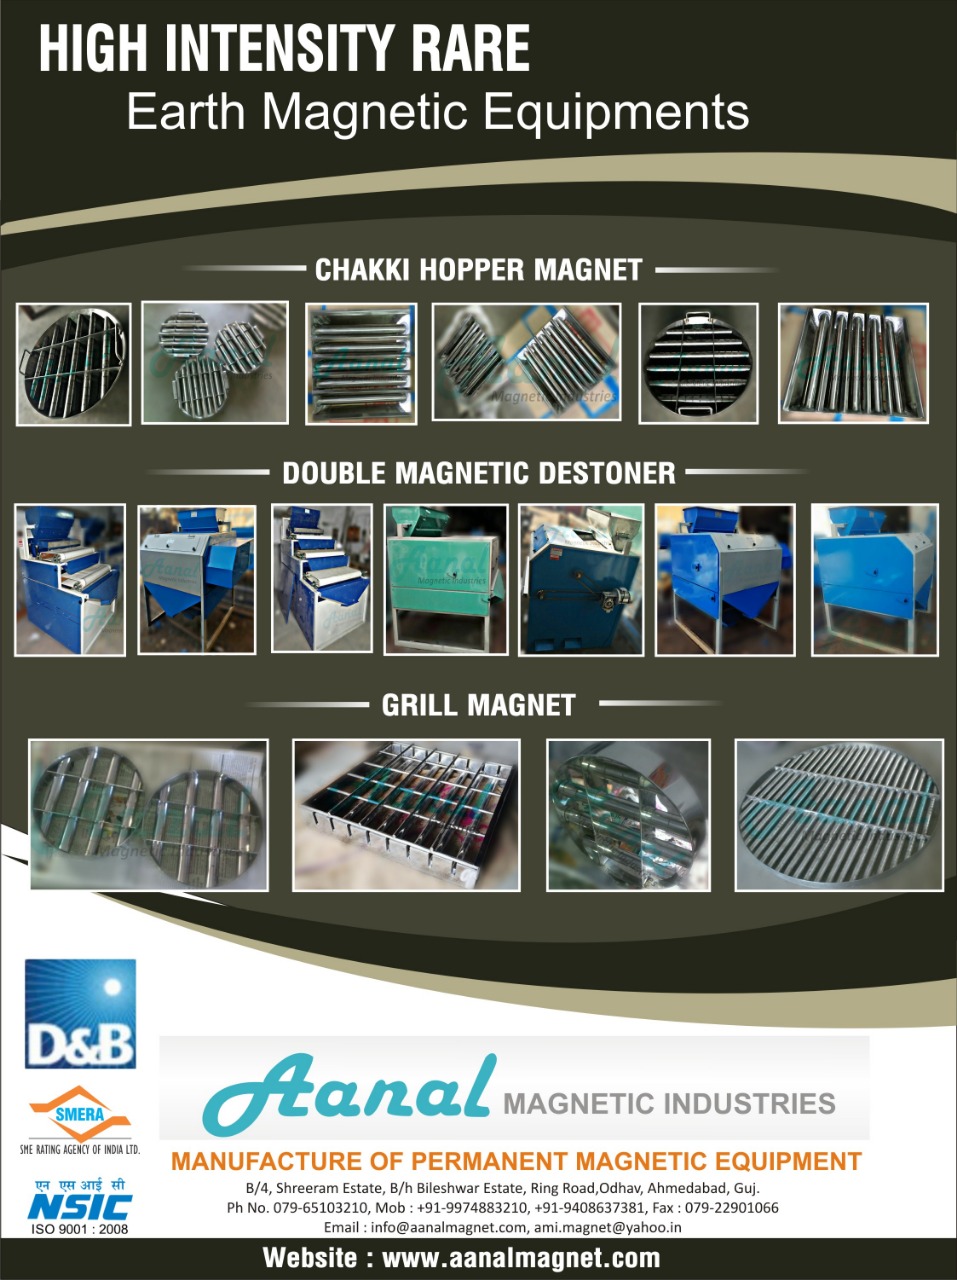 Aanal Magnetic Industries - Manufacturers of Magnetic Equipments